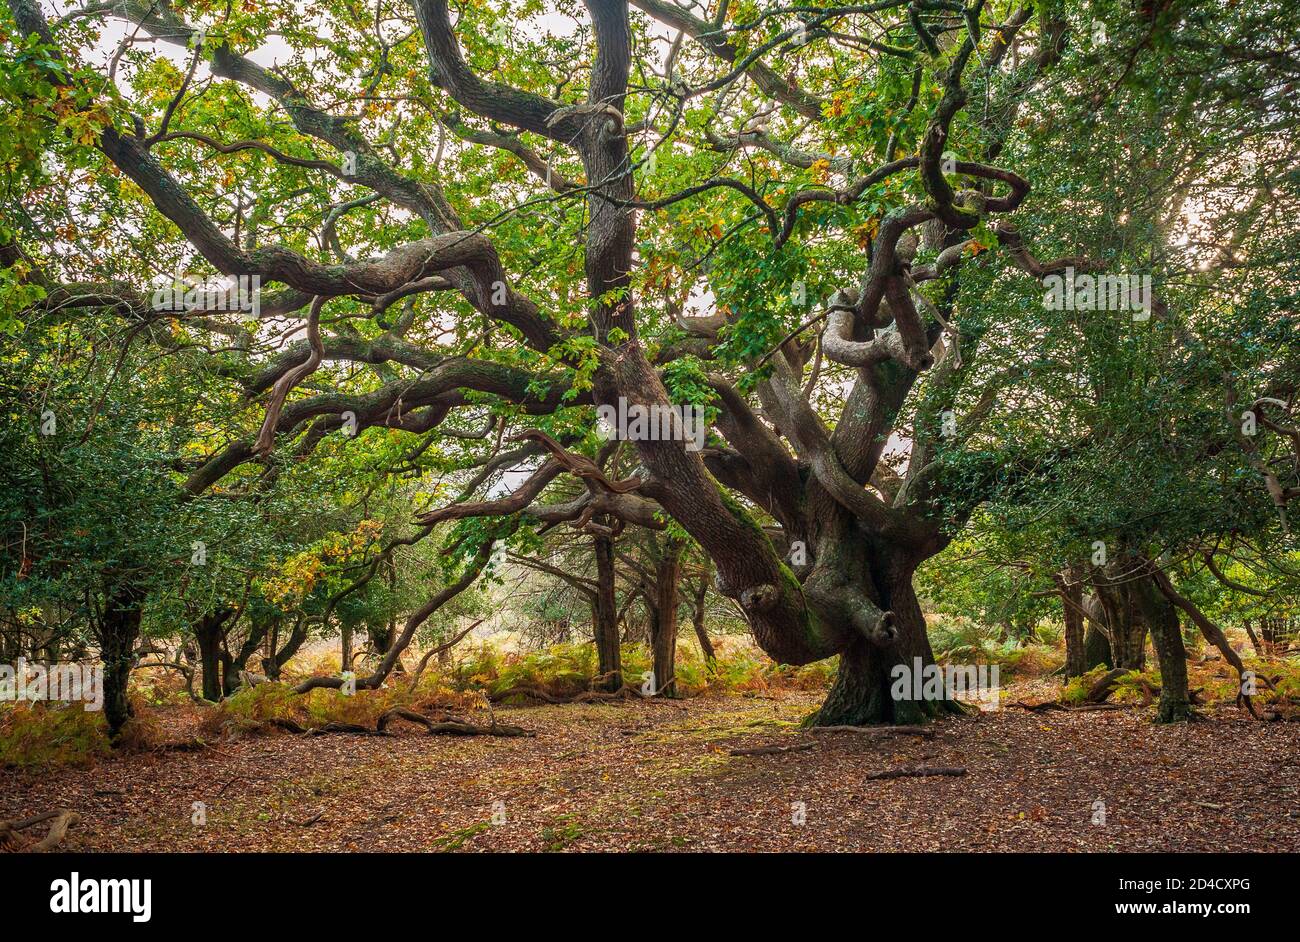 Ancient oak tree with twisting branches, New Forest Stock Photo